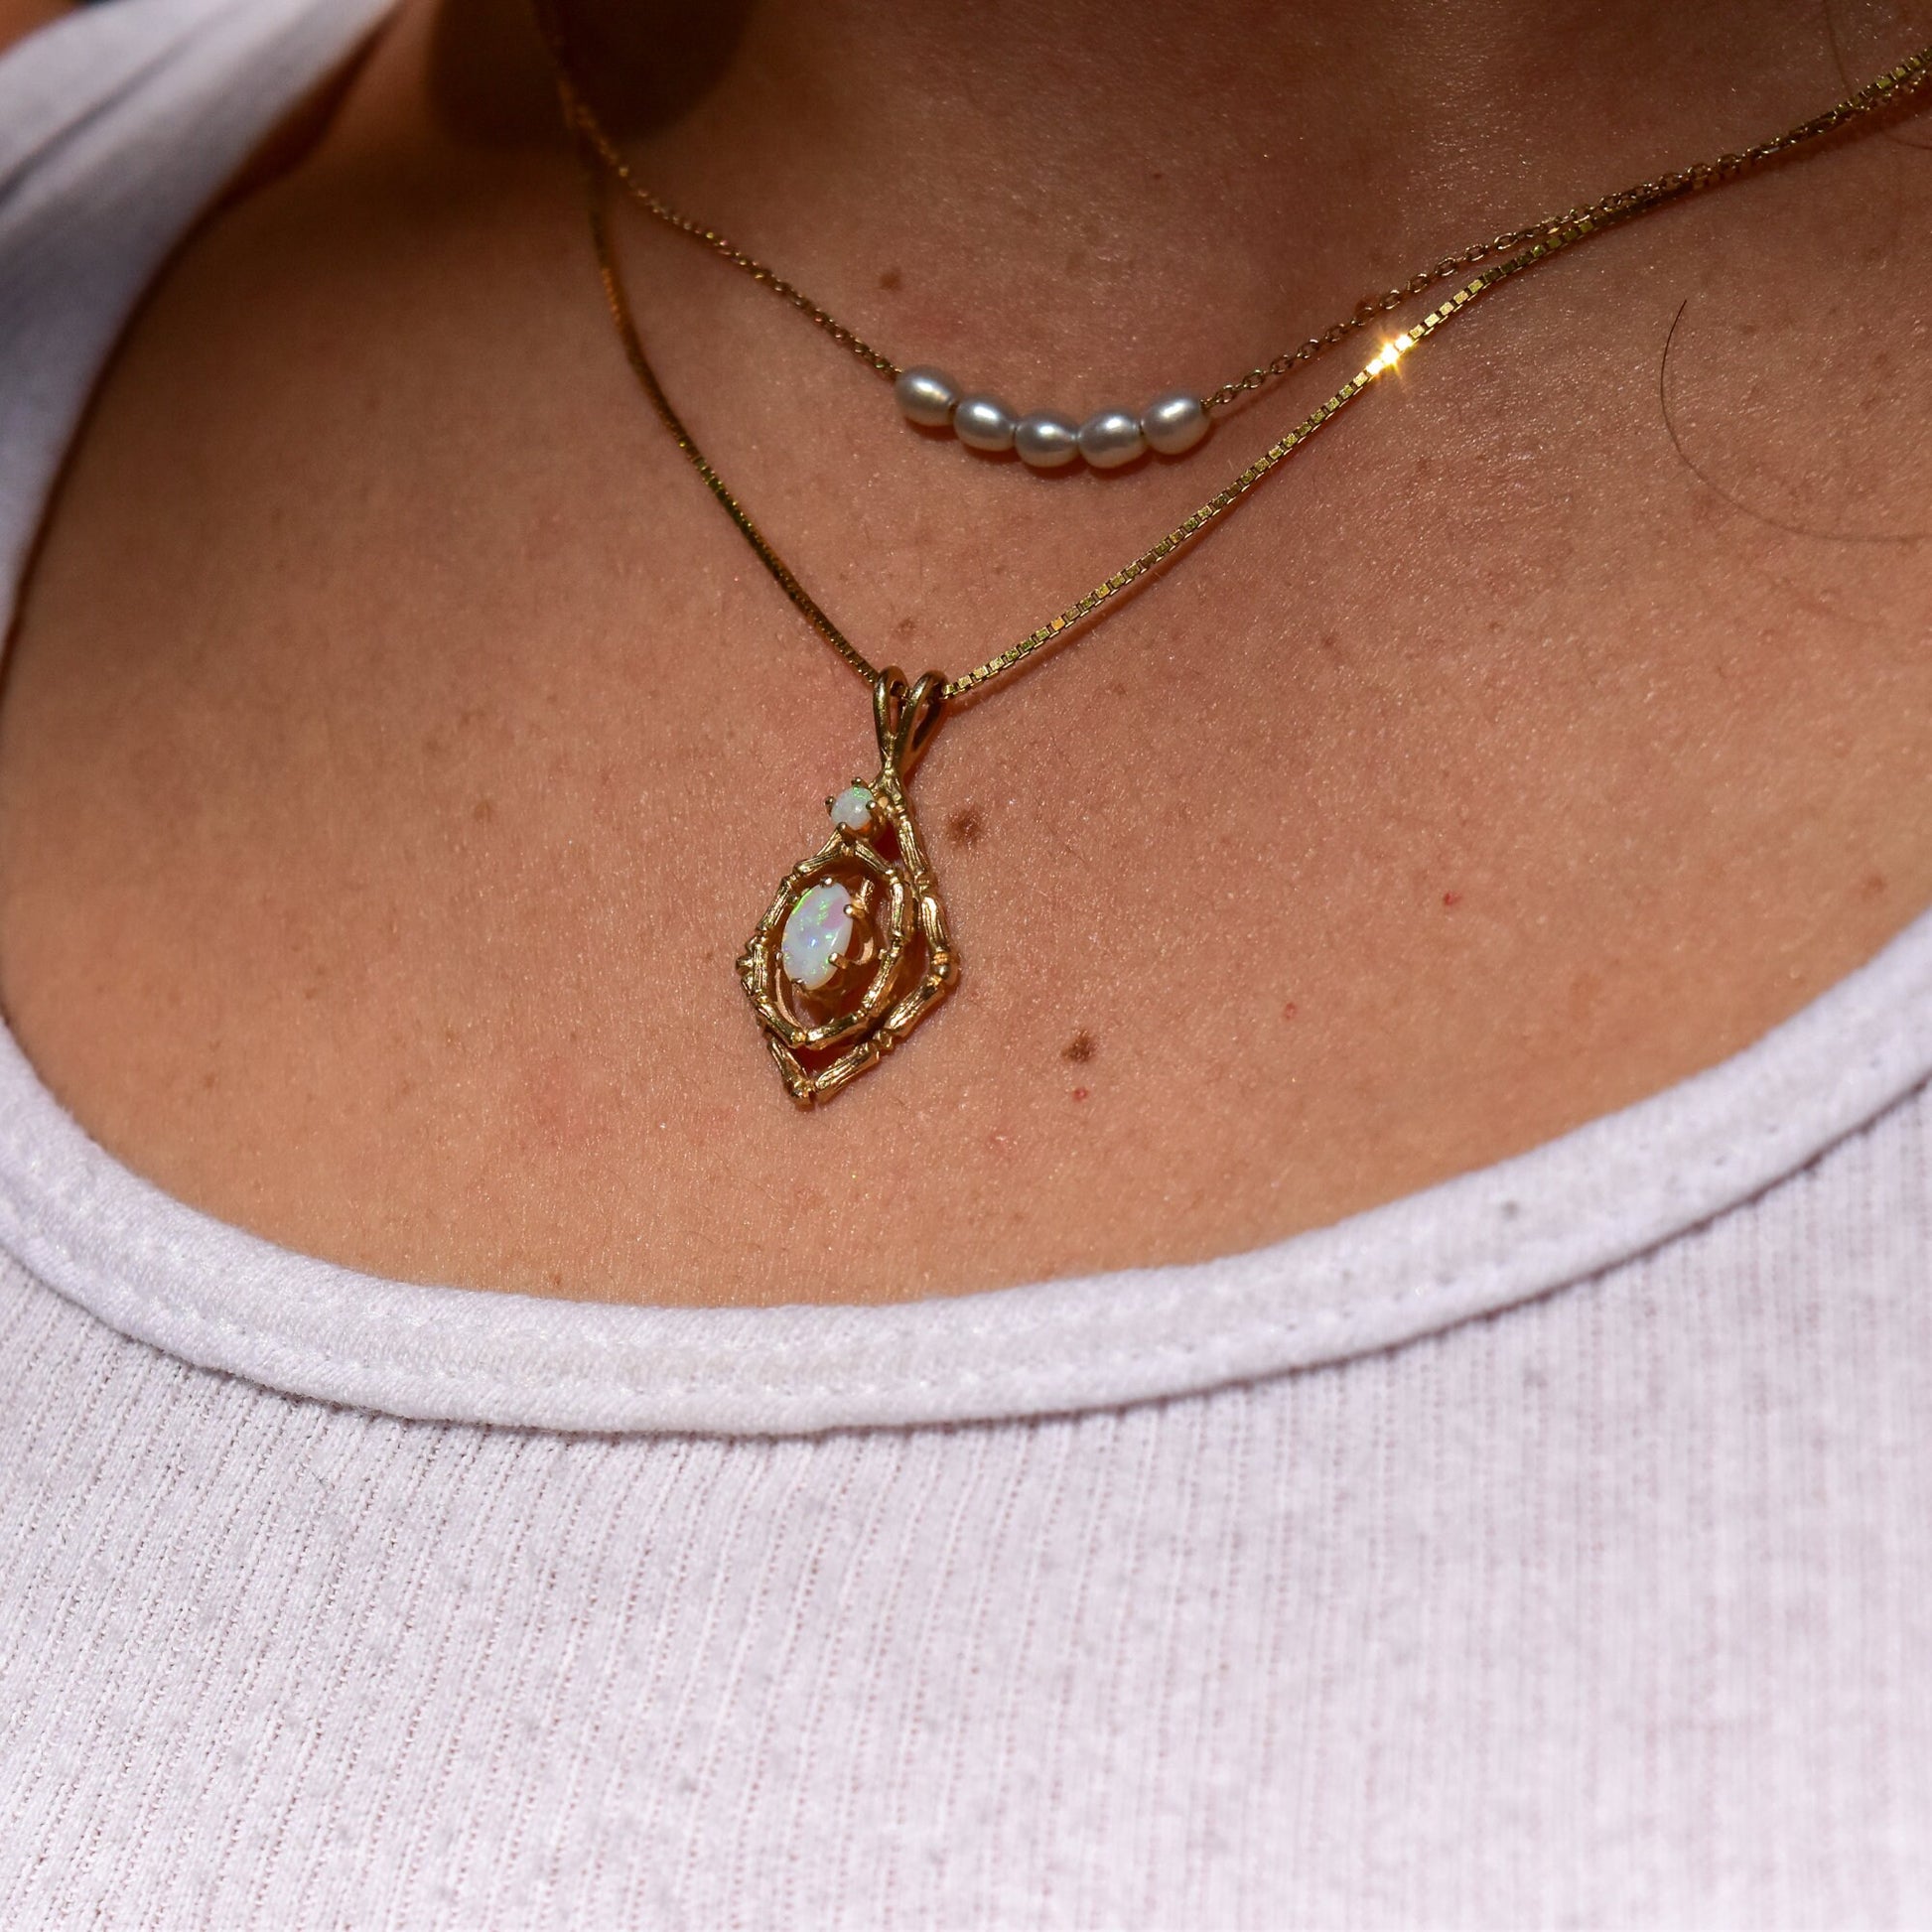 10K yellow gold bamboo motif pendant necklace with two white opal cabochon stones, estate jewelry piece showcased on woman's neck and upper chest.